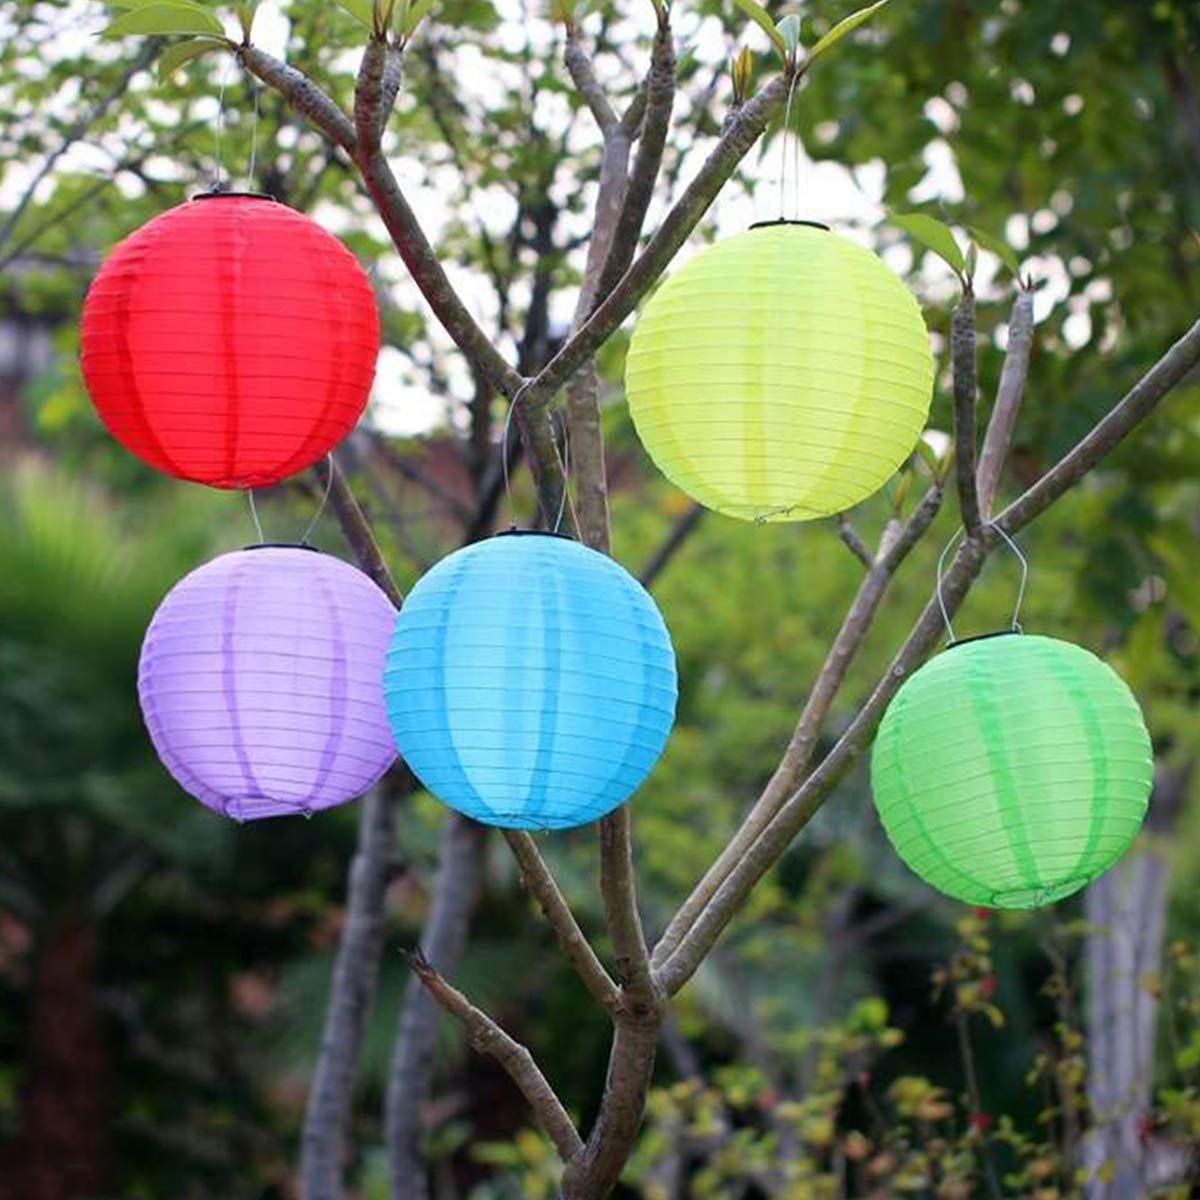 Inkarto Lights Multicolor Hanging Paper Lantern Ball - Perfect for All Festival Decorations! | Pack of 1 Piece, Color May Vary